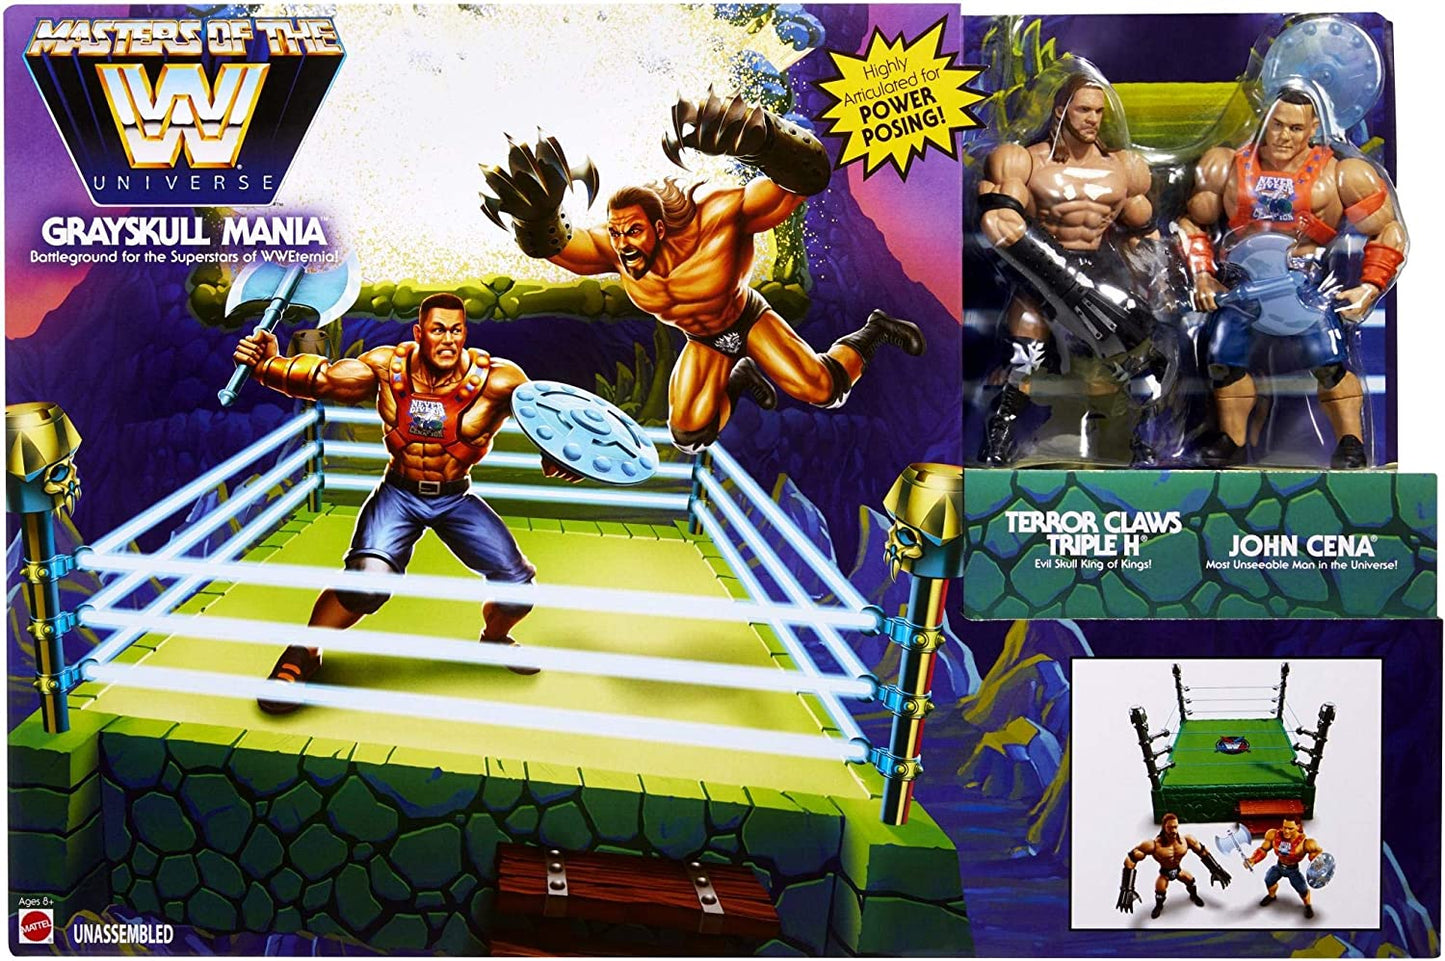 2019 Mattel Masters of the WWE Universe Grayskull Mania [Exclusive, With Terror Claws Triple H & John Cena]